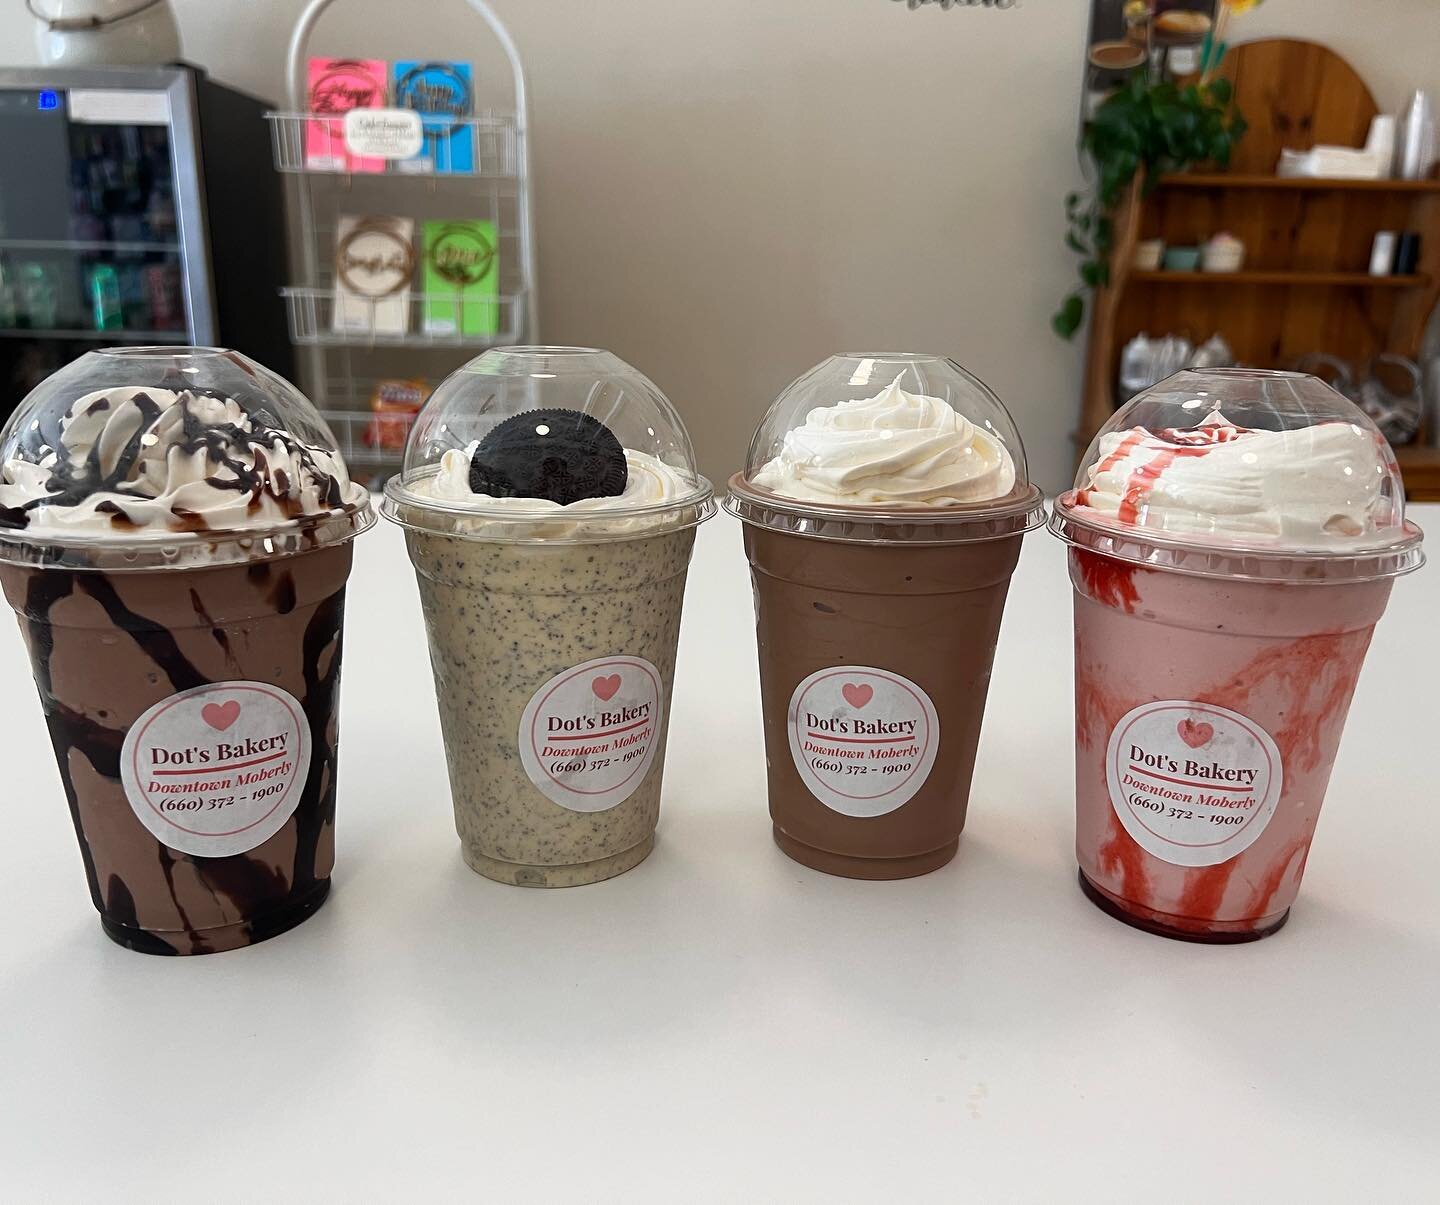 HAPPY HOUR tonight 5-7pm! Milkshakes or Malts just $5!
Starting today, Dot's Bakery will be open till 7pm on Thursdays! Come see us and then head to A Stroke of Magic for Open Craft night!
#thedotsakery #happyhour #milkshakes #crafts #astrokeofmagic